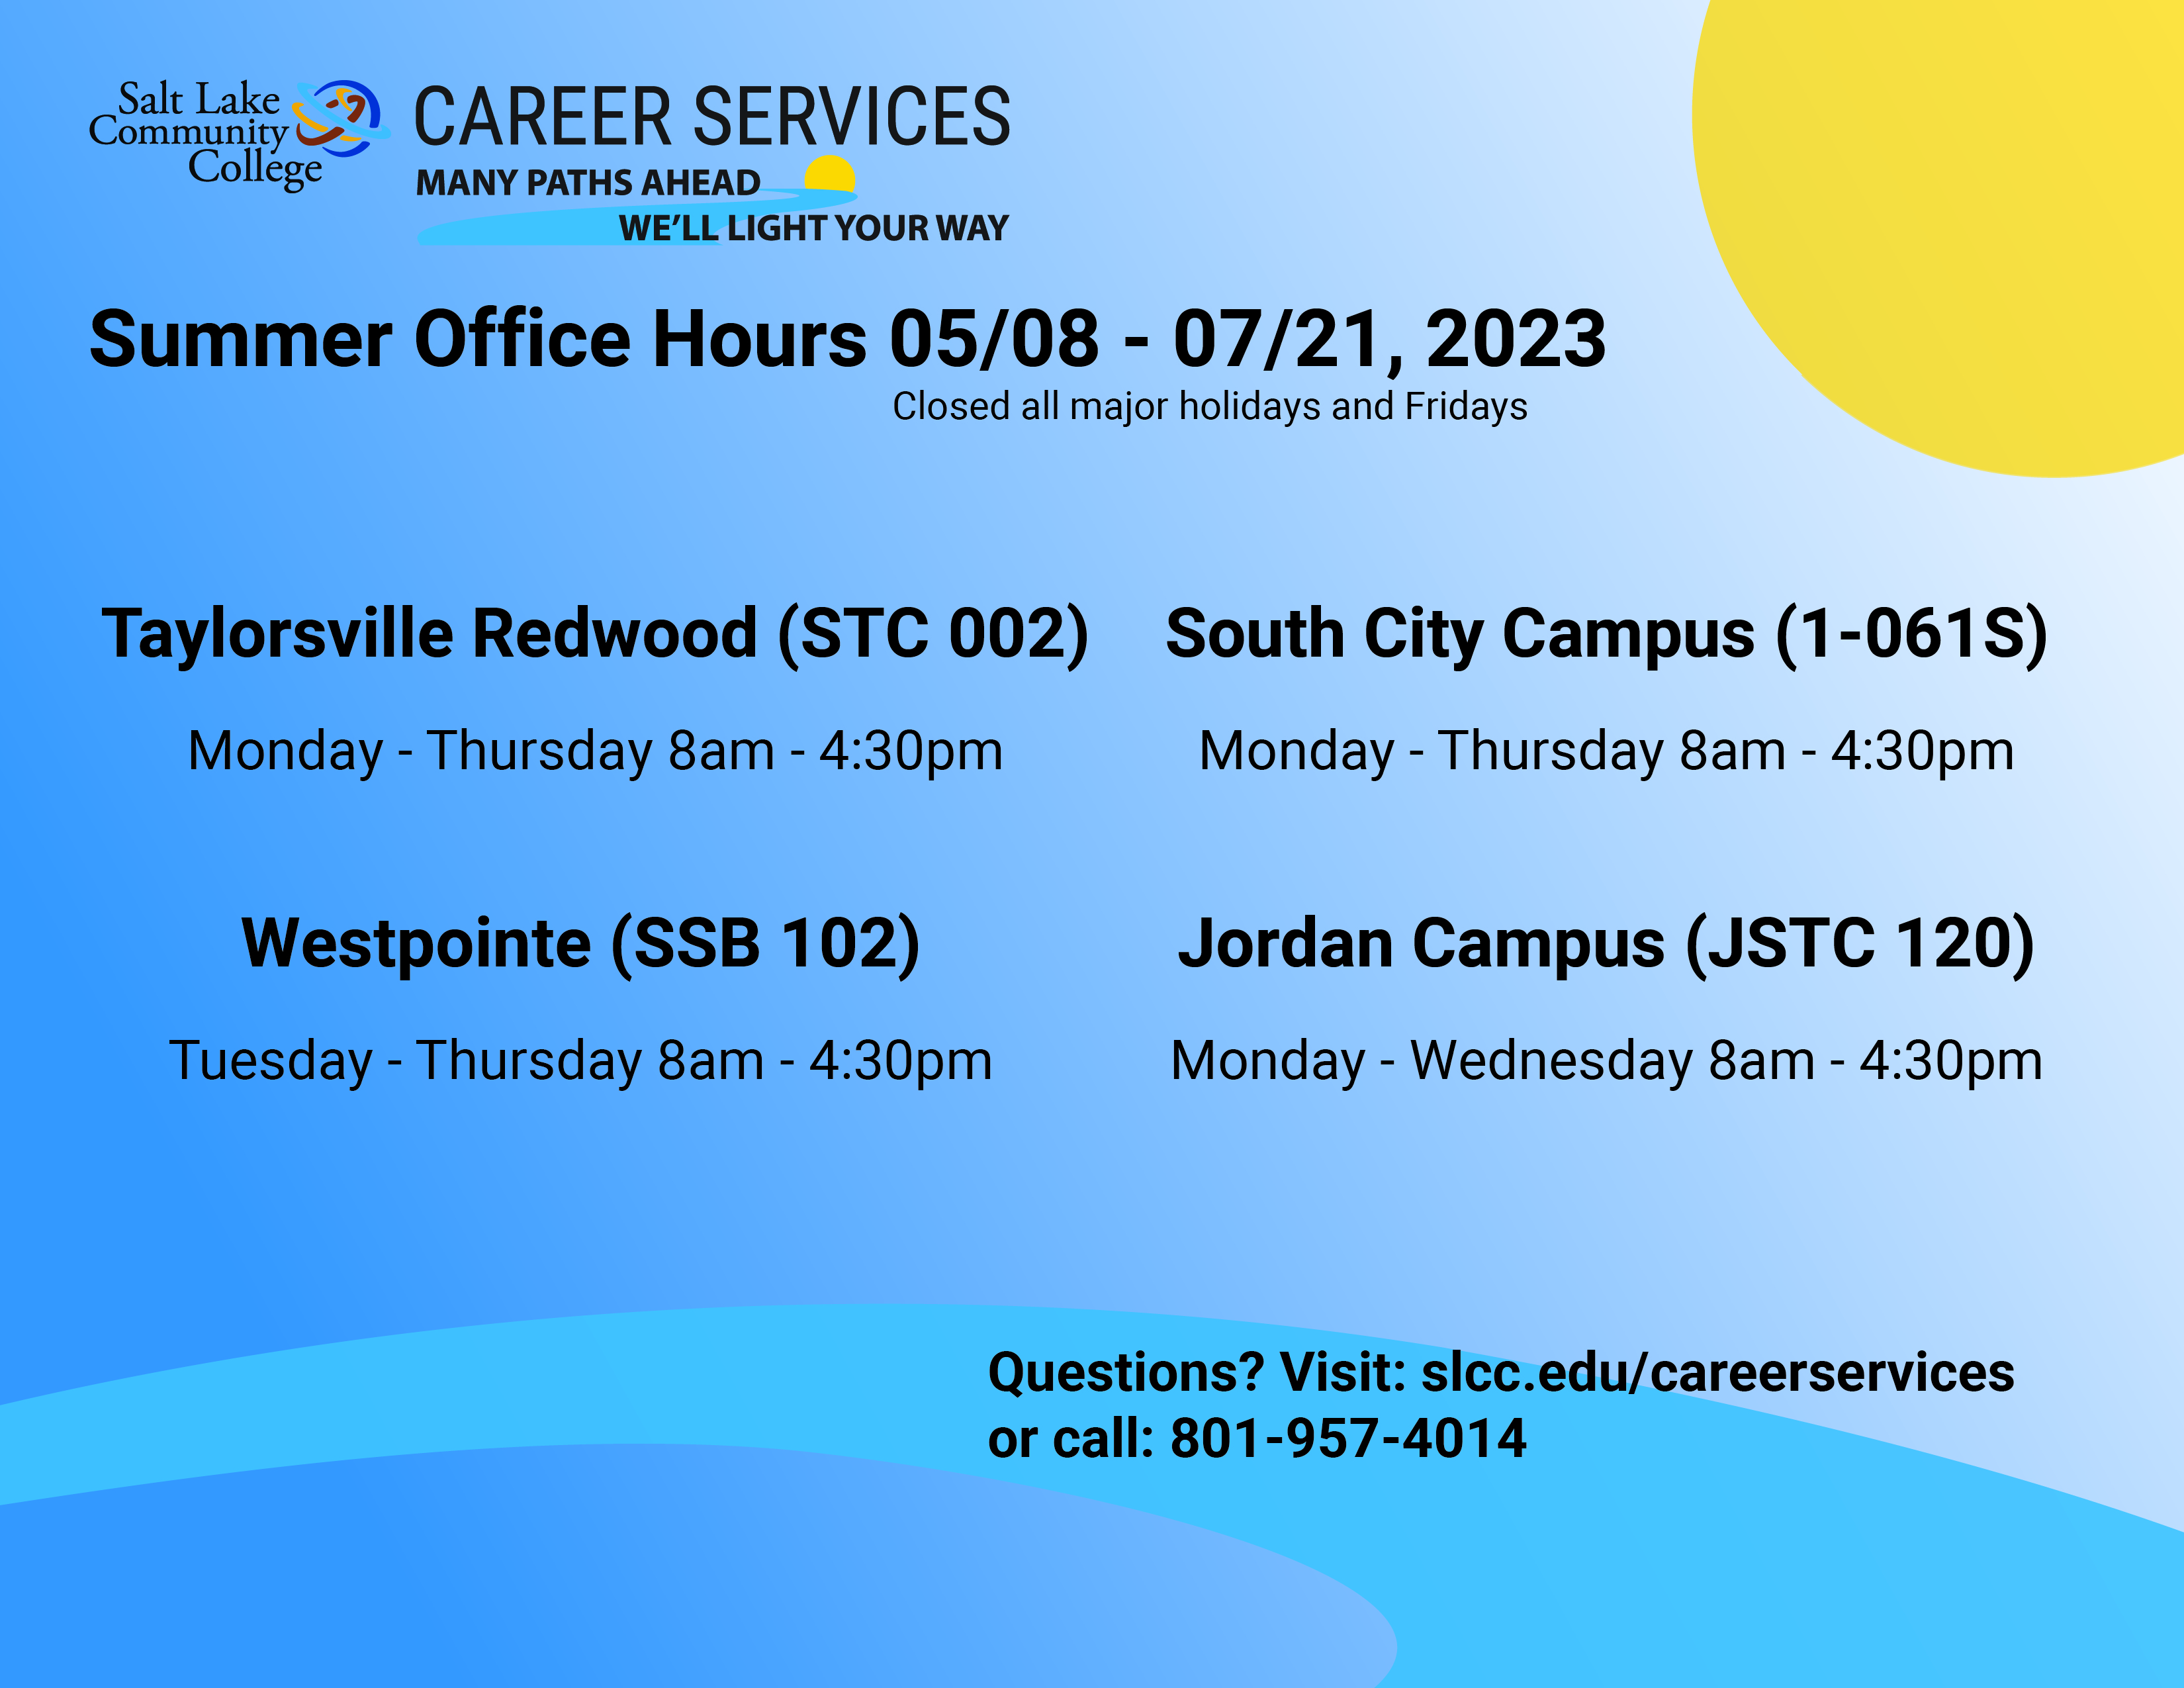 Summer office hours: Taylorsville Redwood STC 002 Monday through Thursday 8:00am to 4:30pm, South City Campus 0-061S Monday through Thursday 8:00am to 4:30pm, Westpointe SSB 102 Tuesday through Thursday 8:00am to 4:30pm, Jordan Campus JSTC 120 Monday through Wednesday 8:00am to 4:30pm